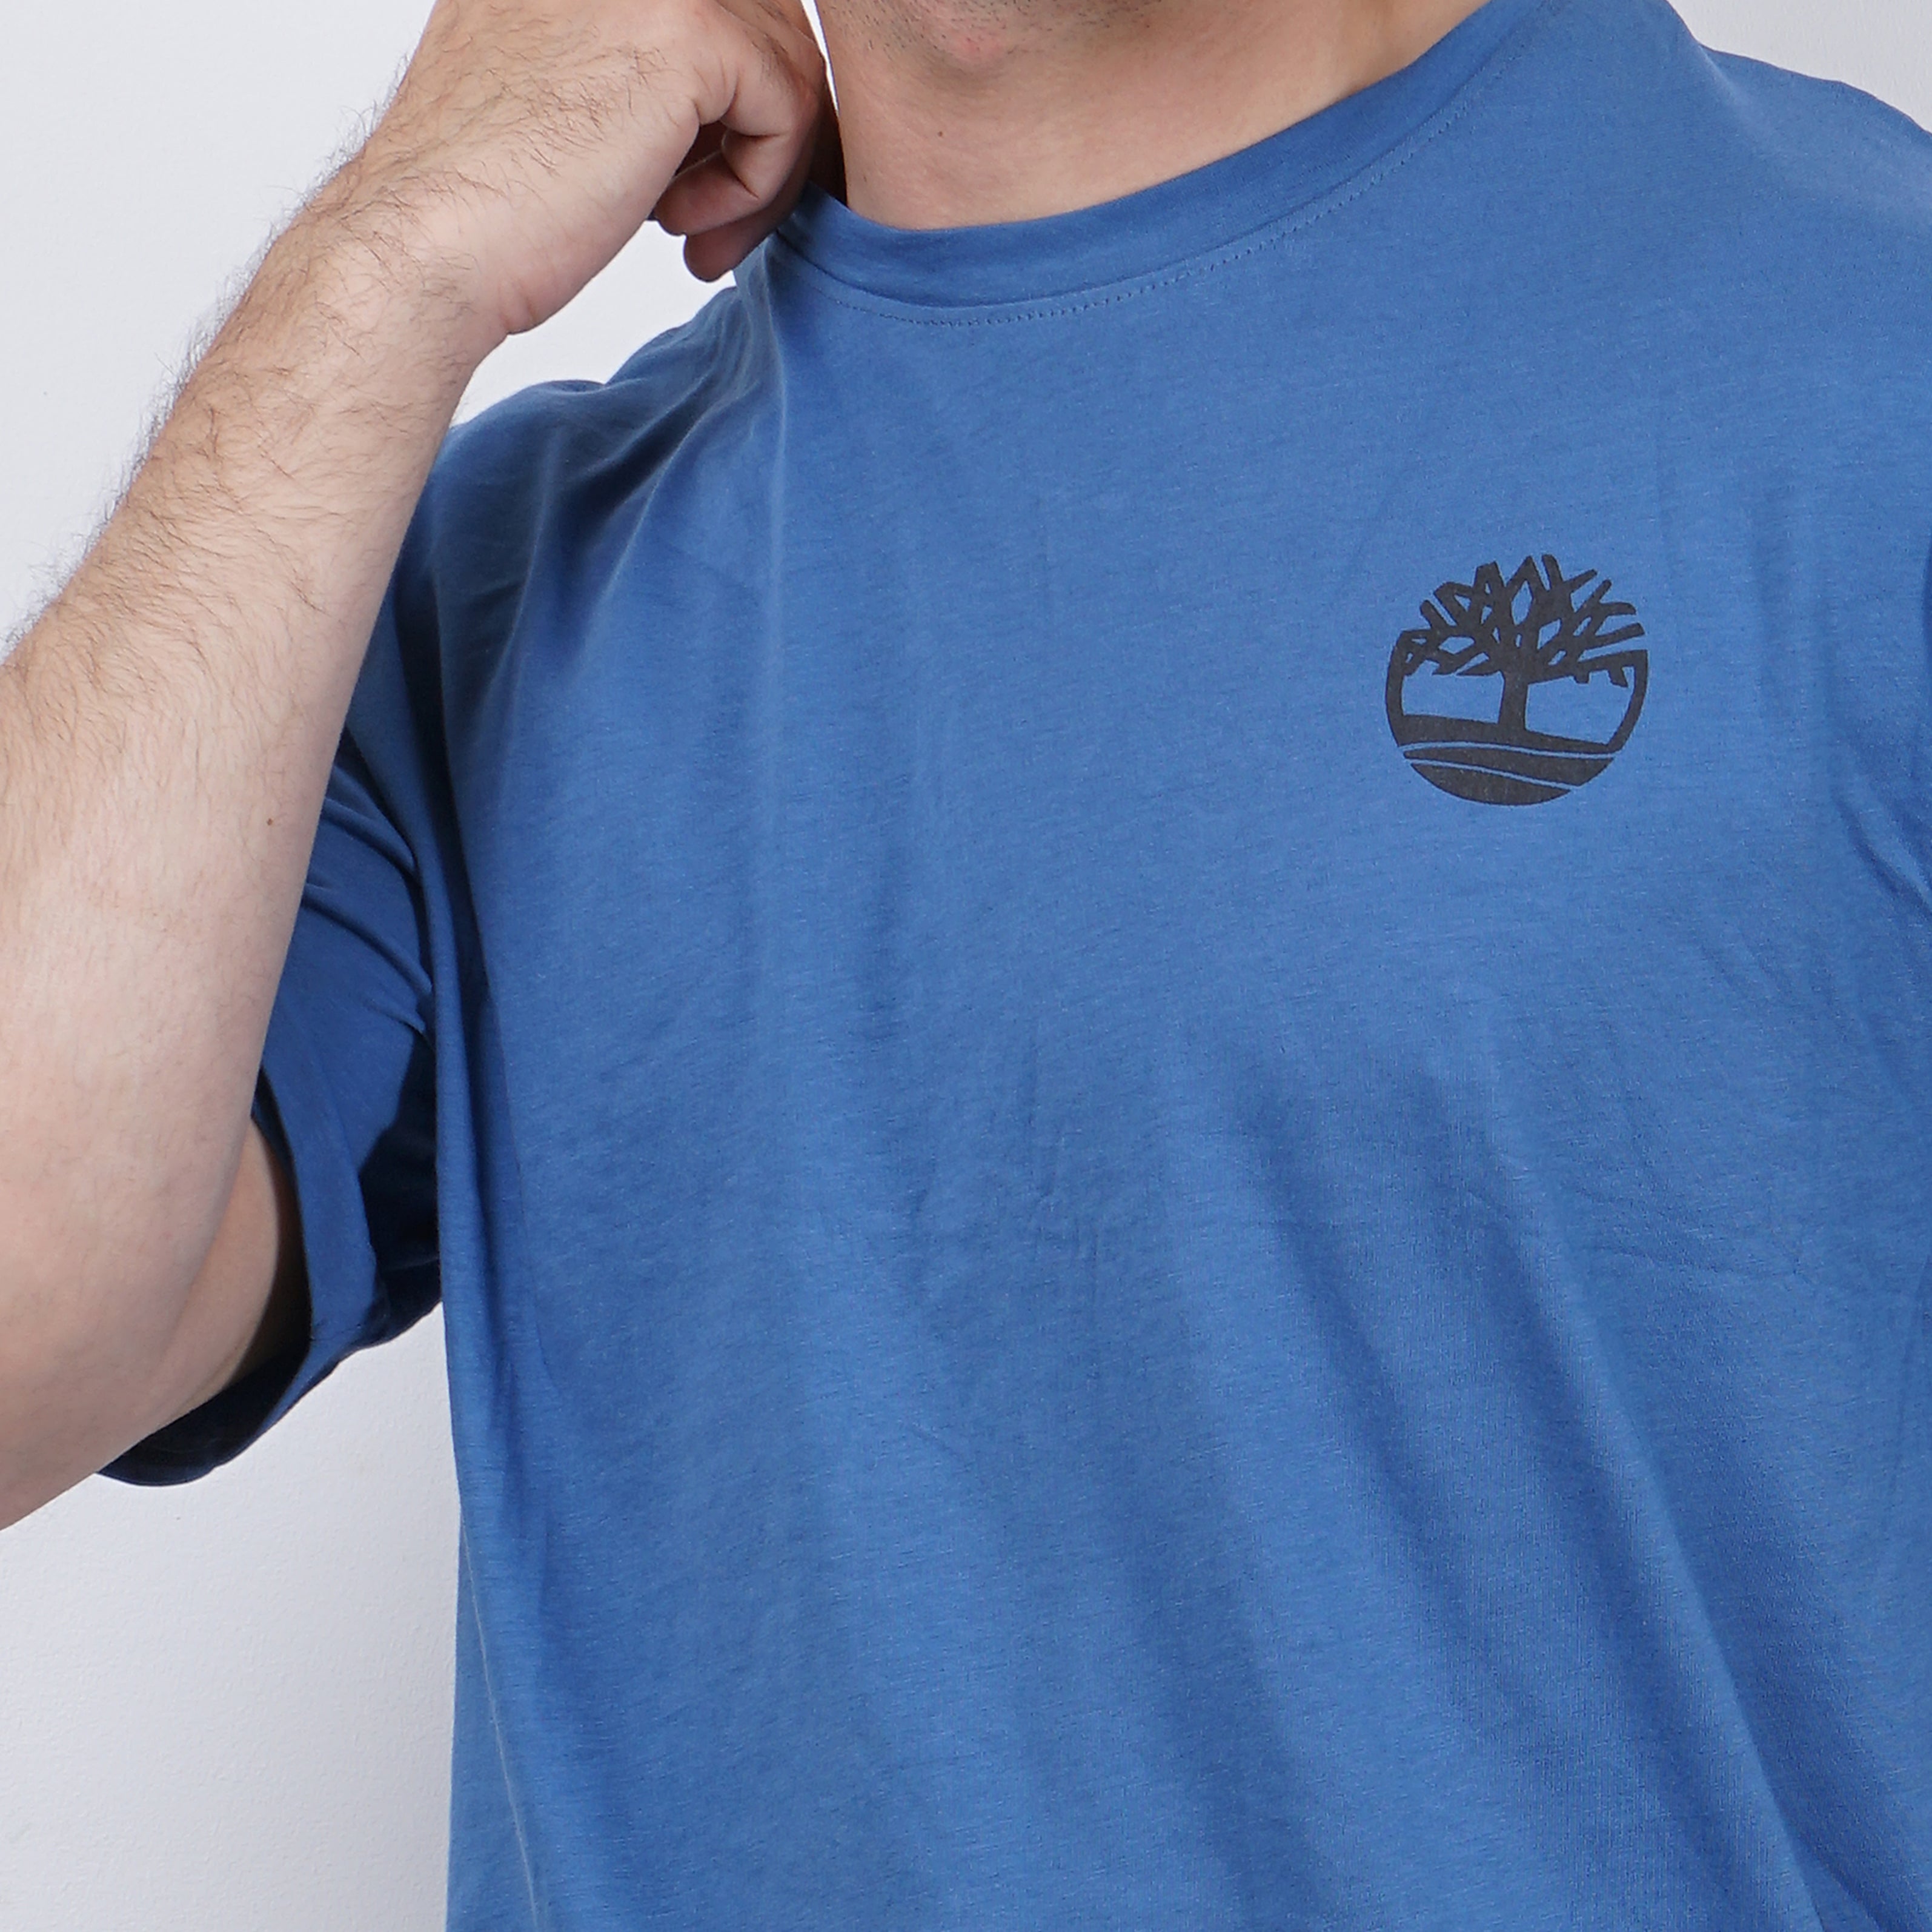 Man in blue t-shirt with Timberland logo, posing with hand on neck.